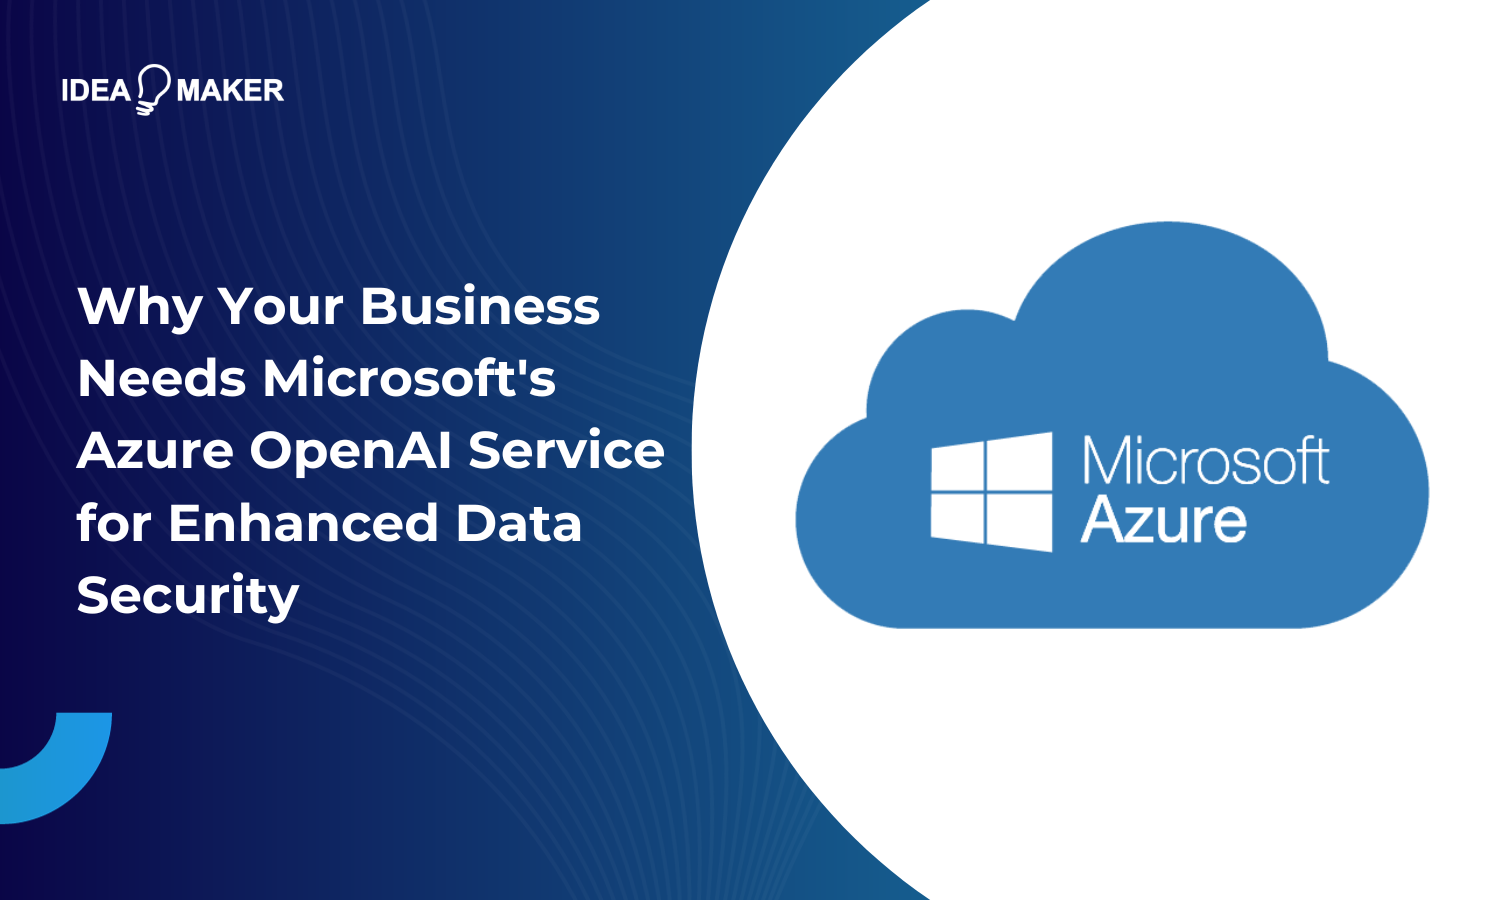 Why Your Business Needs Microsoft's Azure OpenAI Service for Enhanced Data Security